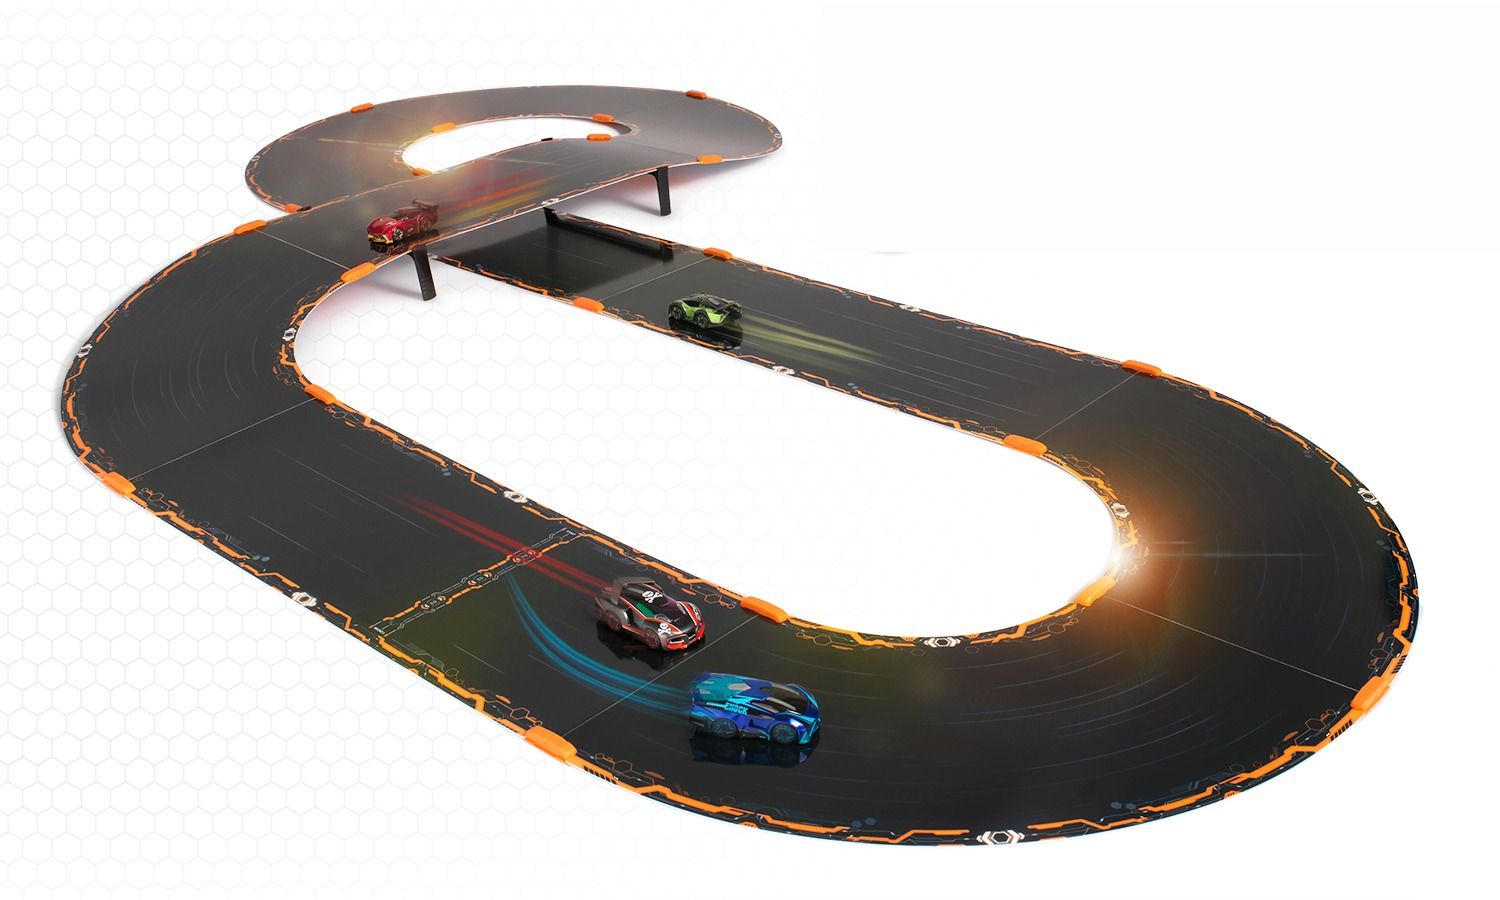 Anki Overdrive: Awesome reboot of one of the hottest tech toys